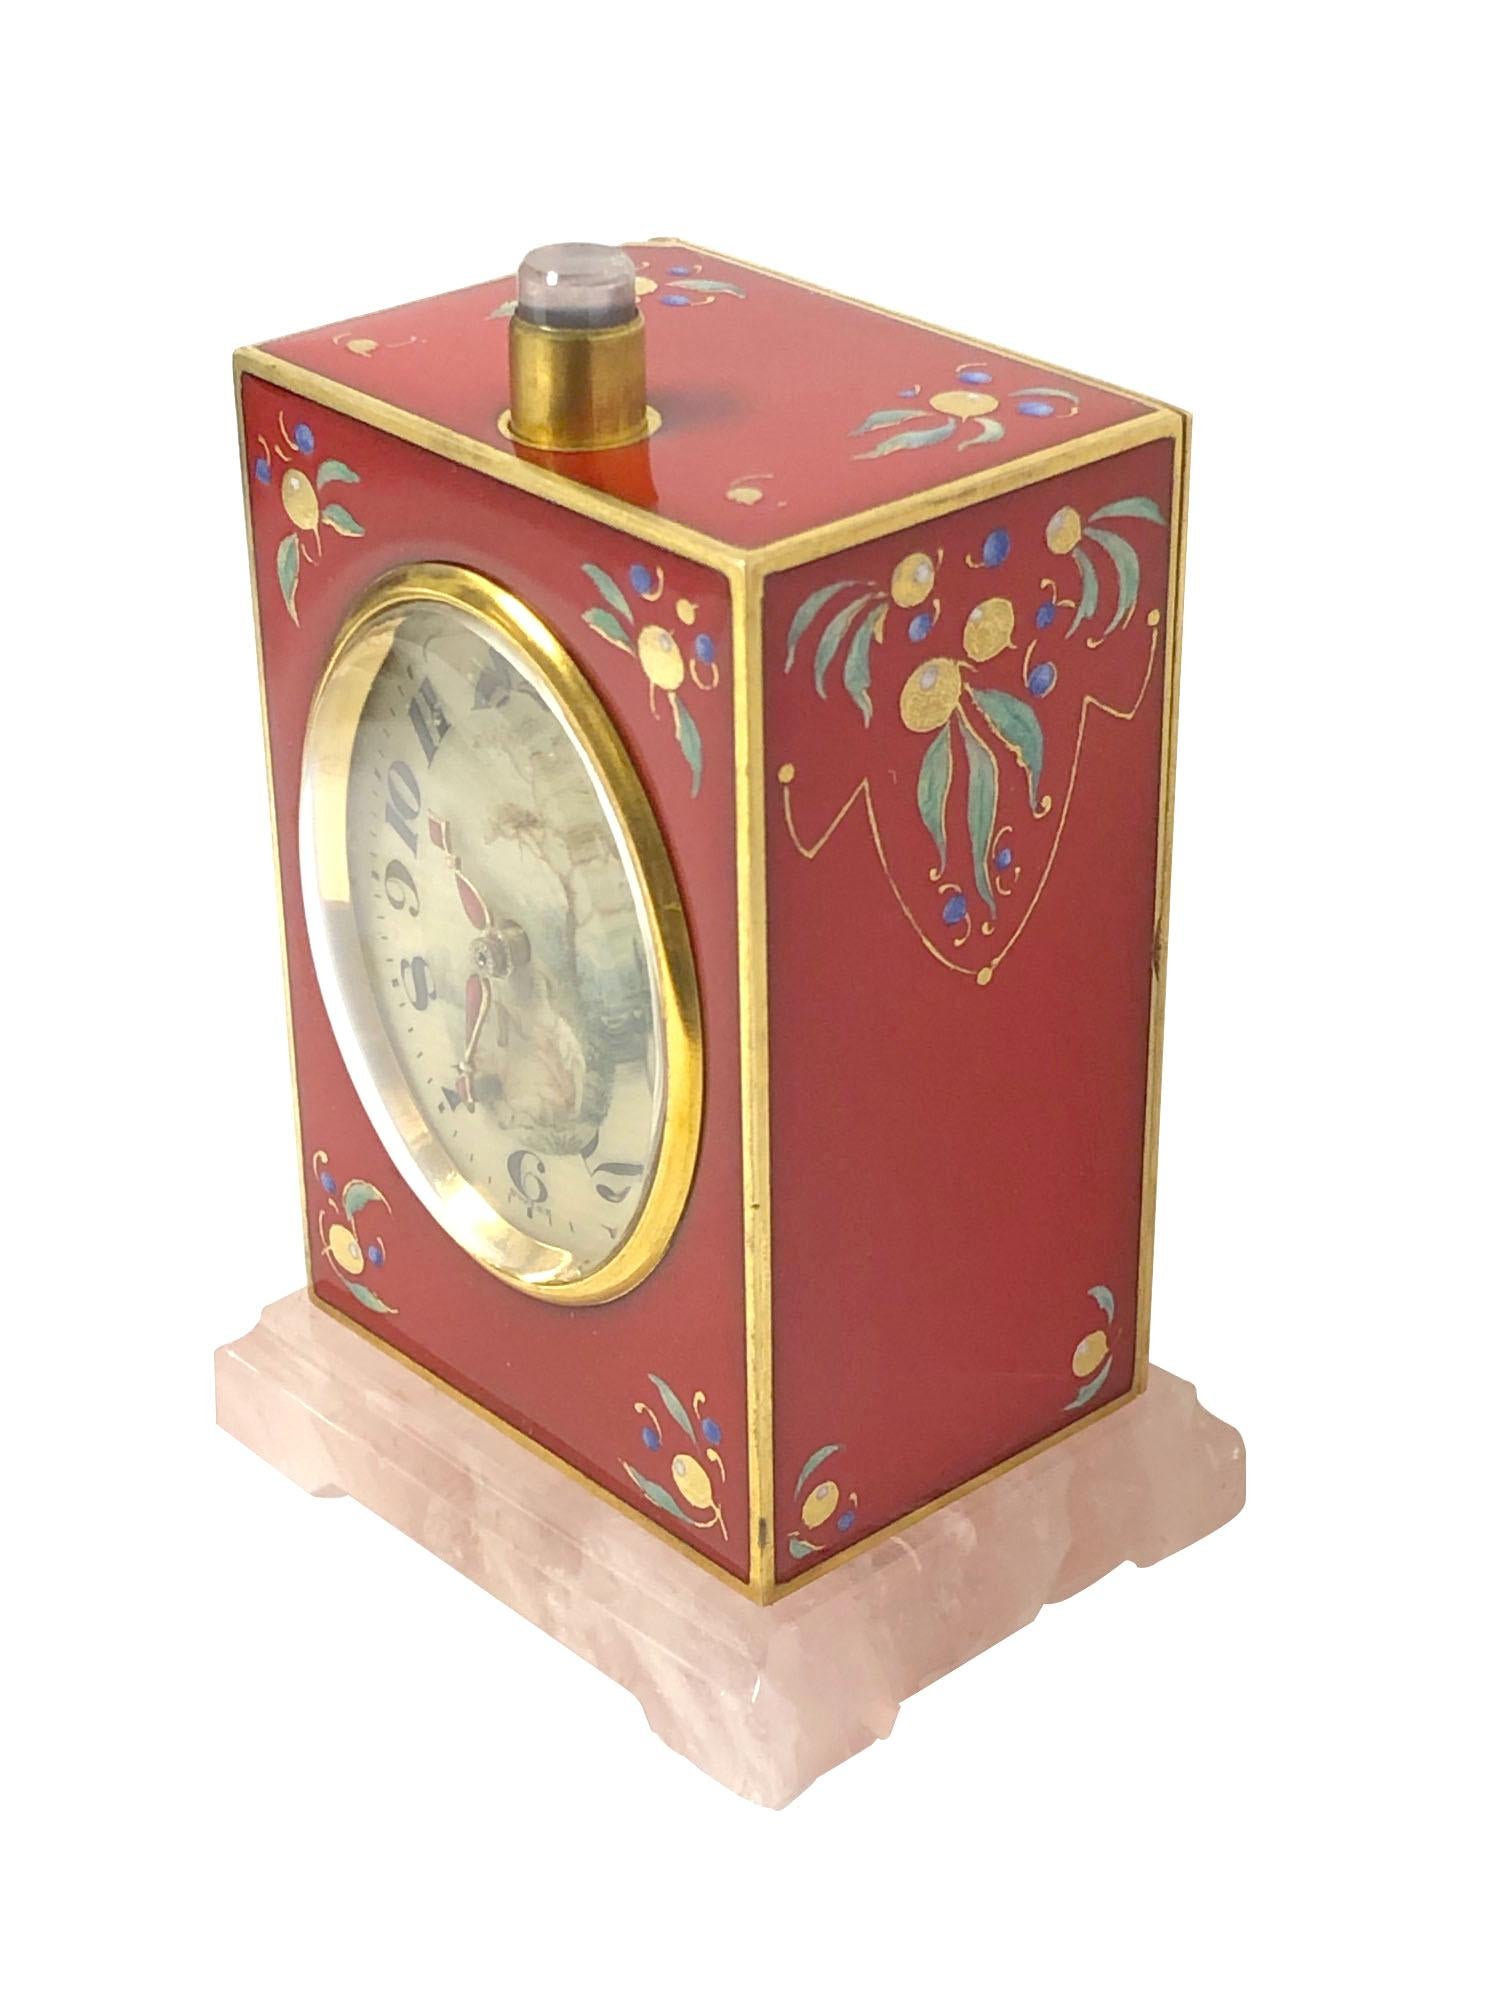 Circa 1920s Repeater Clock by D. Fresard Switzerland, Gold Gilt Sterling Silver case with Red Enamel measuring 3 X 2 X 1 1/4 inches, Rose Quartz Base and a Rose Quartz push on the case top. 11 Jewel, 8 Day key wind movement with Quarter Hour